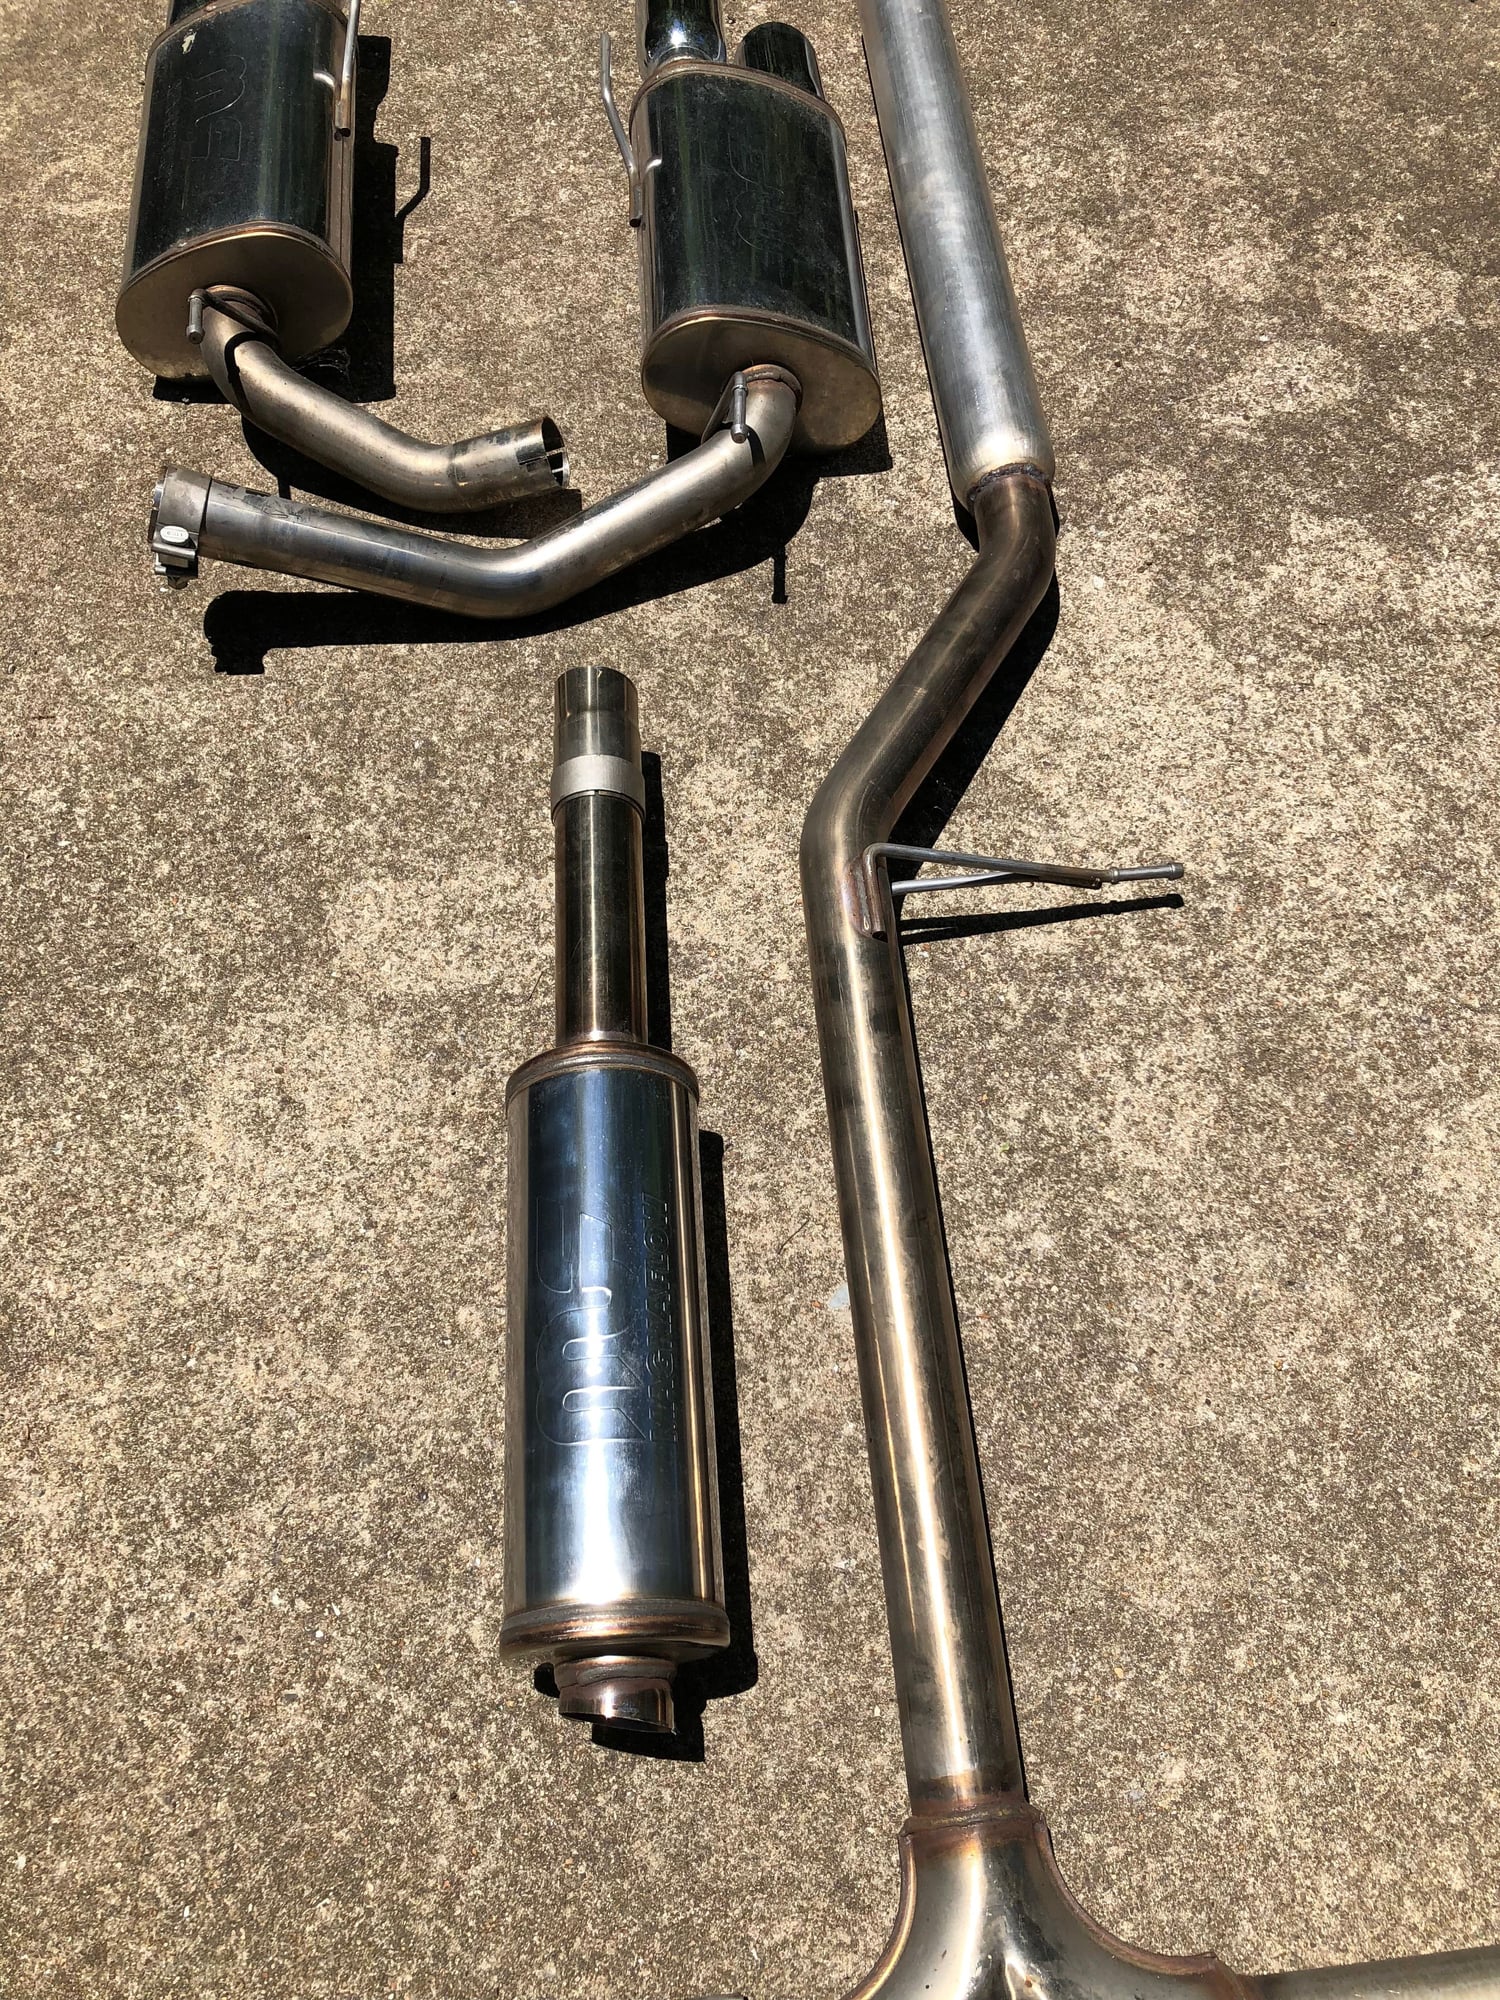 Engine - Exhaust - FS: EndlessRPM Cat-Back Exhaust With Quad Tips For Sale - 2004-2007 TL - Used - 2004 to 2008 Acura TL - Branson, MO 65616, United States